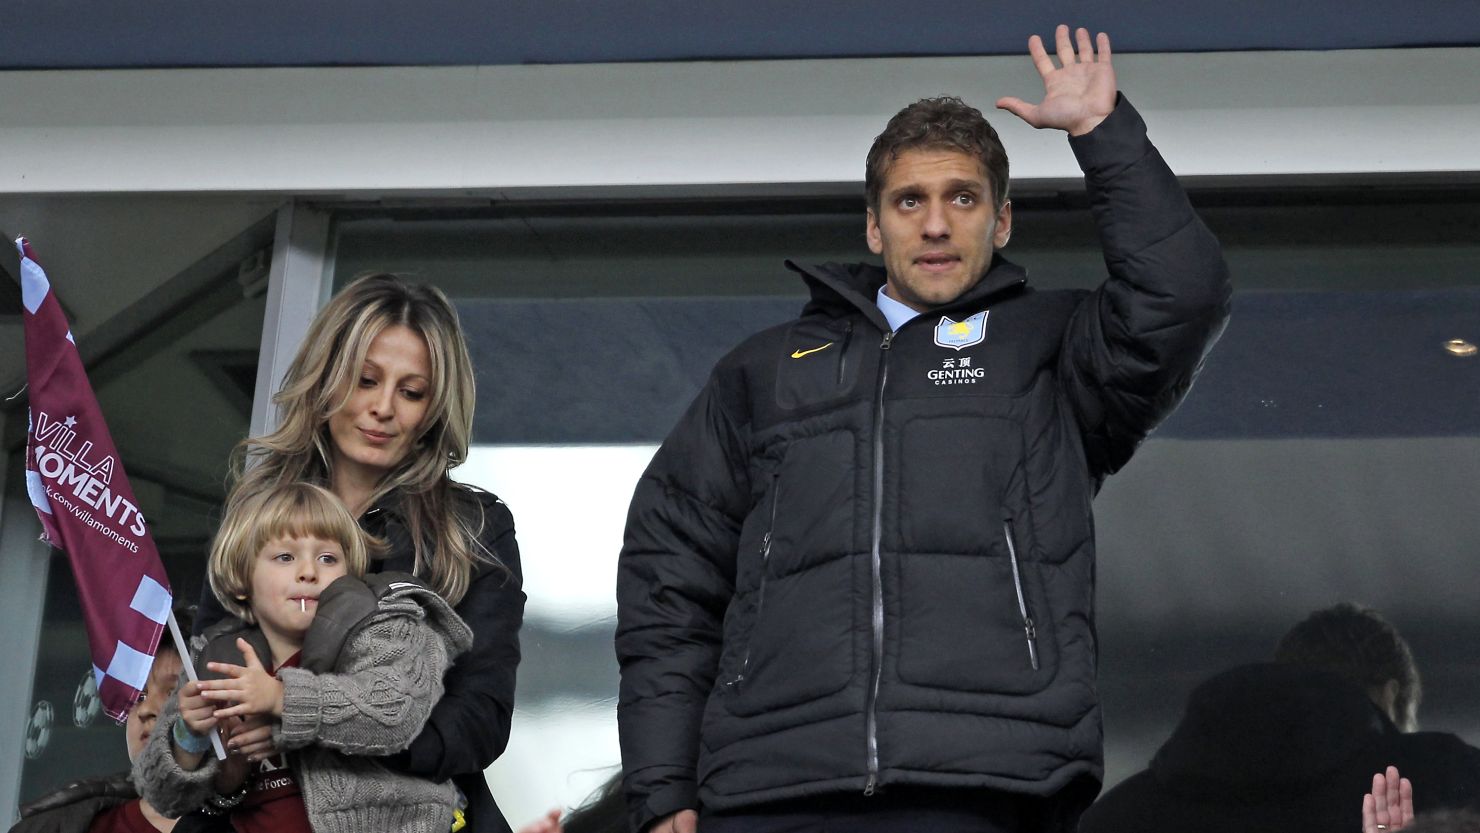 Stiliyan Petrov waves to the crowd at Villa Park on Saturday as he and his family attended the game against Chelsea